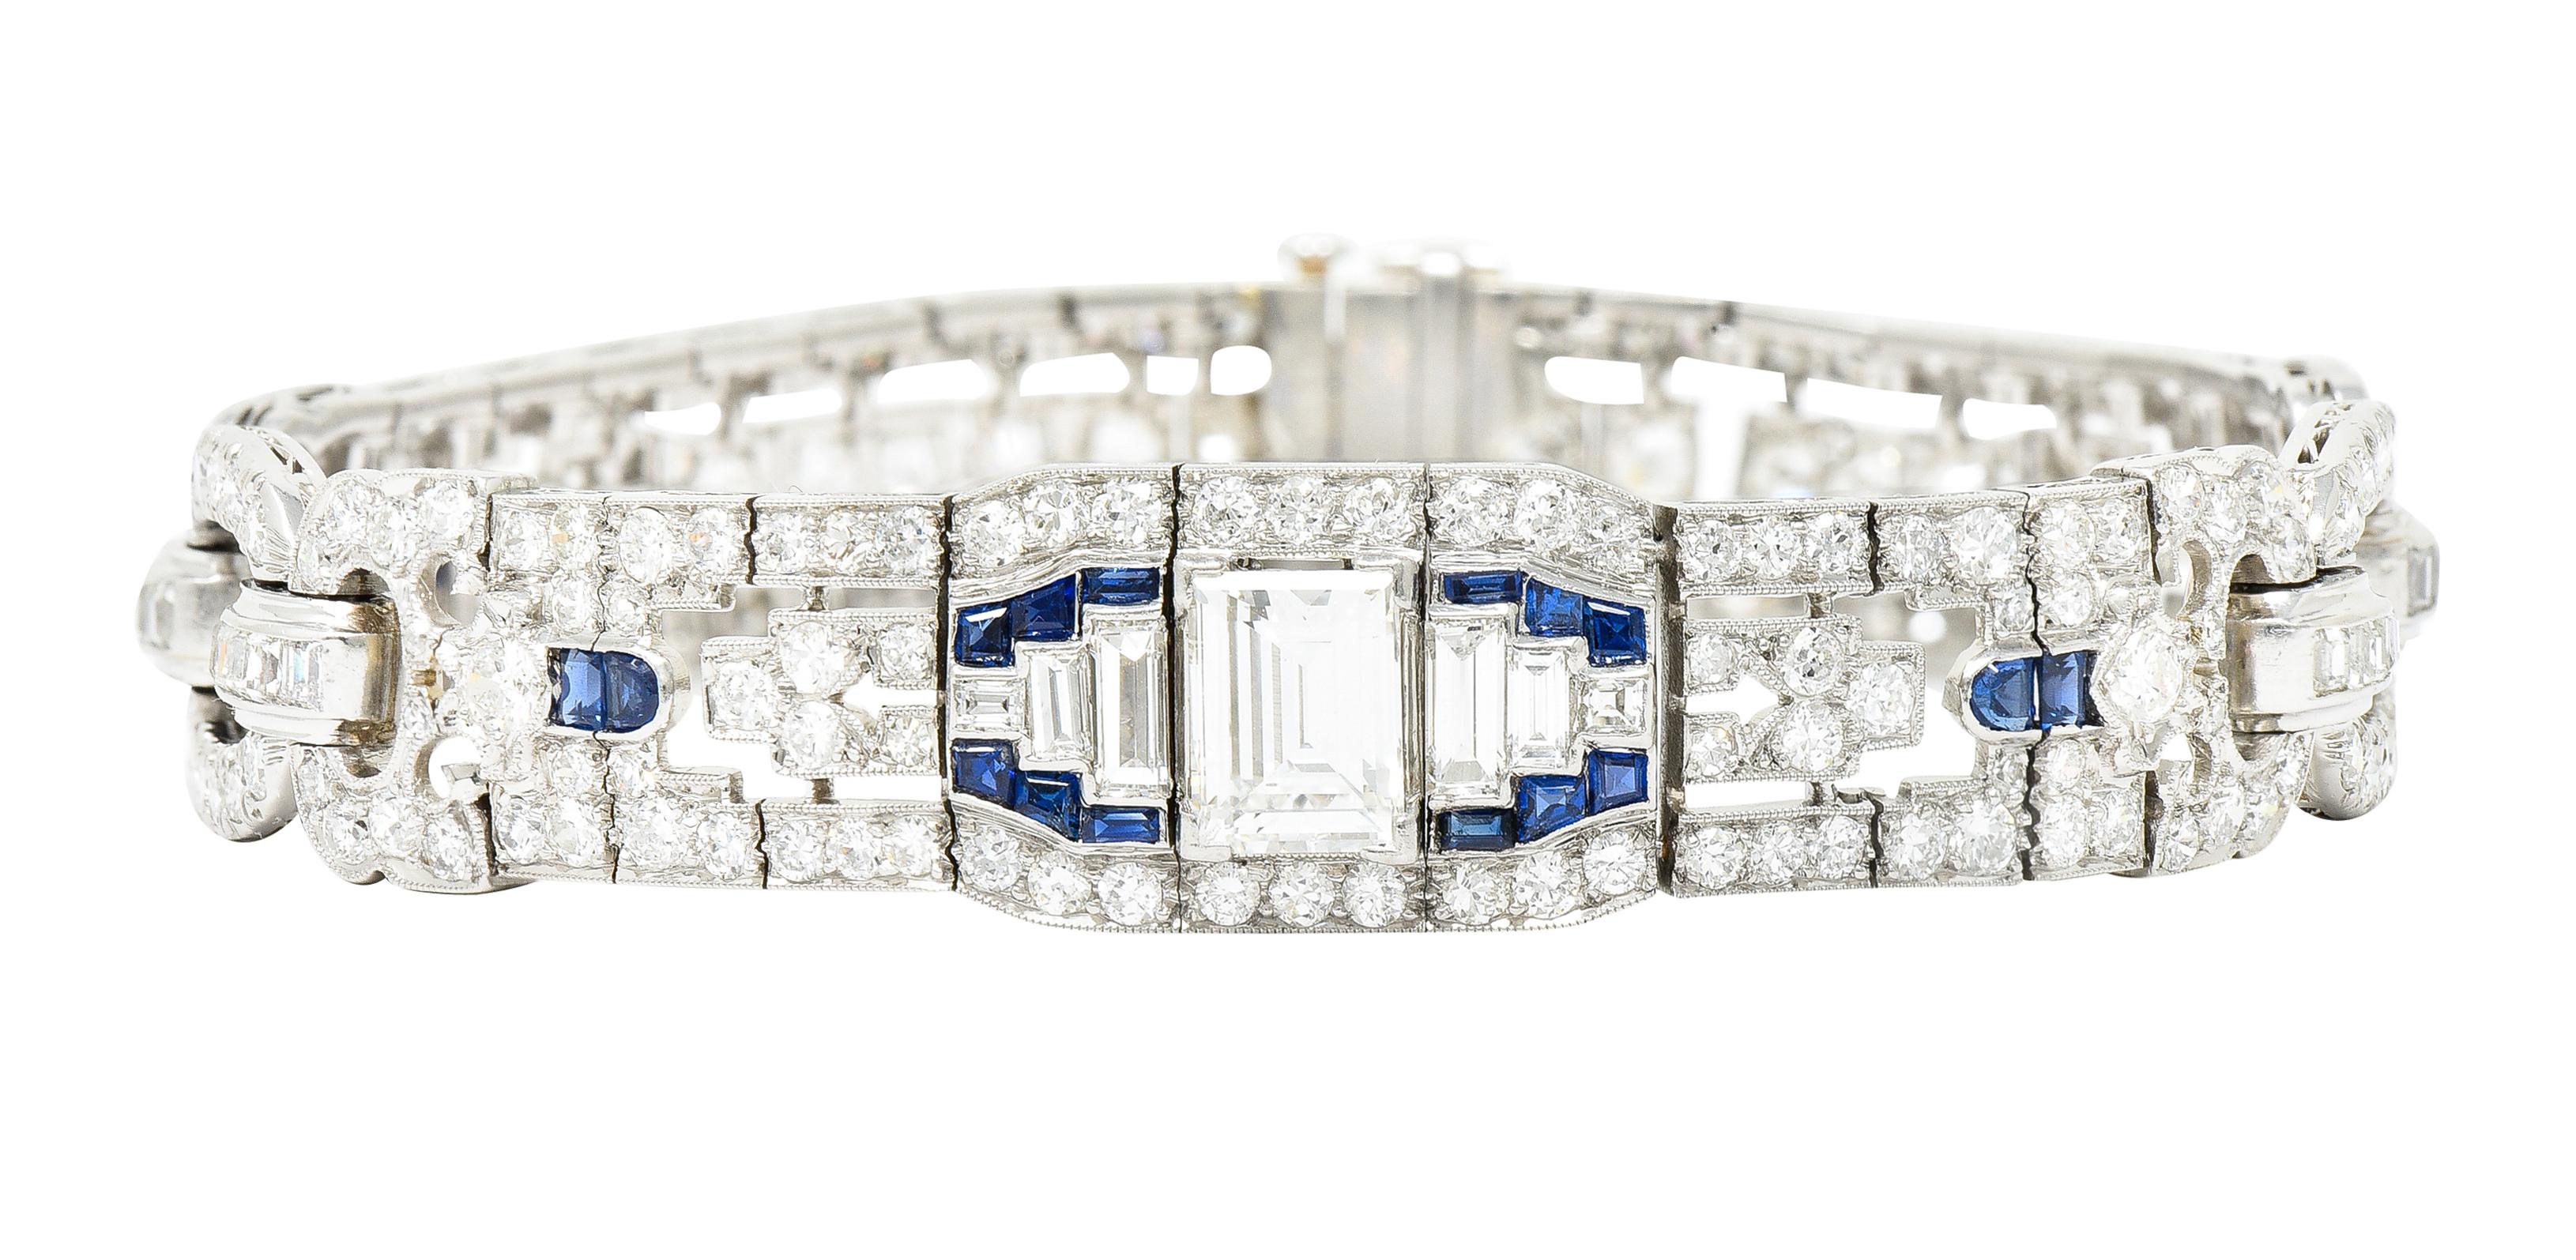 Comprised of hinged platinum link panels pierced with arrow motifs and alternating with oval links. Centering a baguette cut diamond weighing approximately 1.55 carats total - H color with VS clarity. Flanked by additional baguette cut diamonds